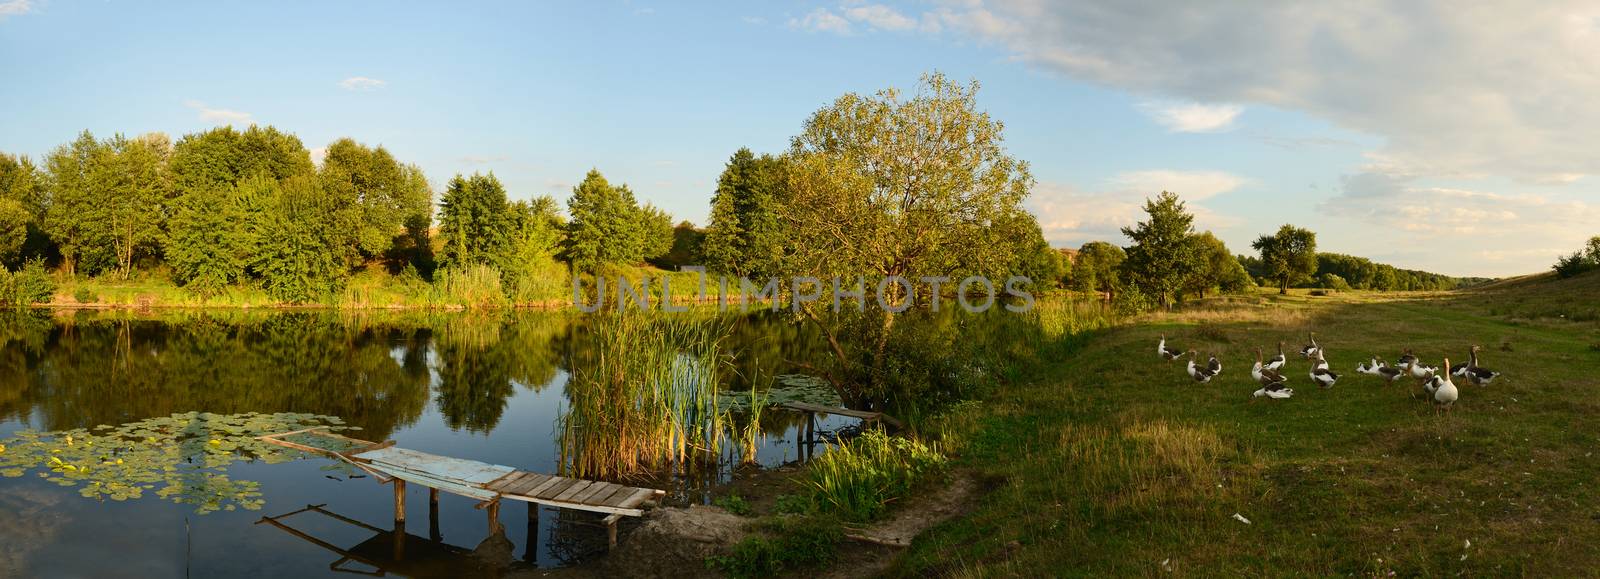 Rural landscape with pier and lake and reflected trees and water lilies and geese during sunset